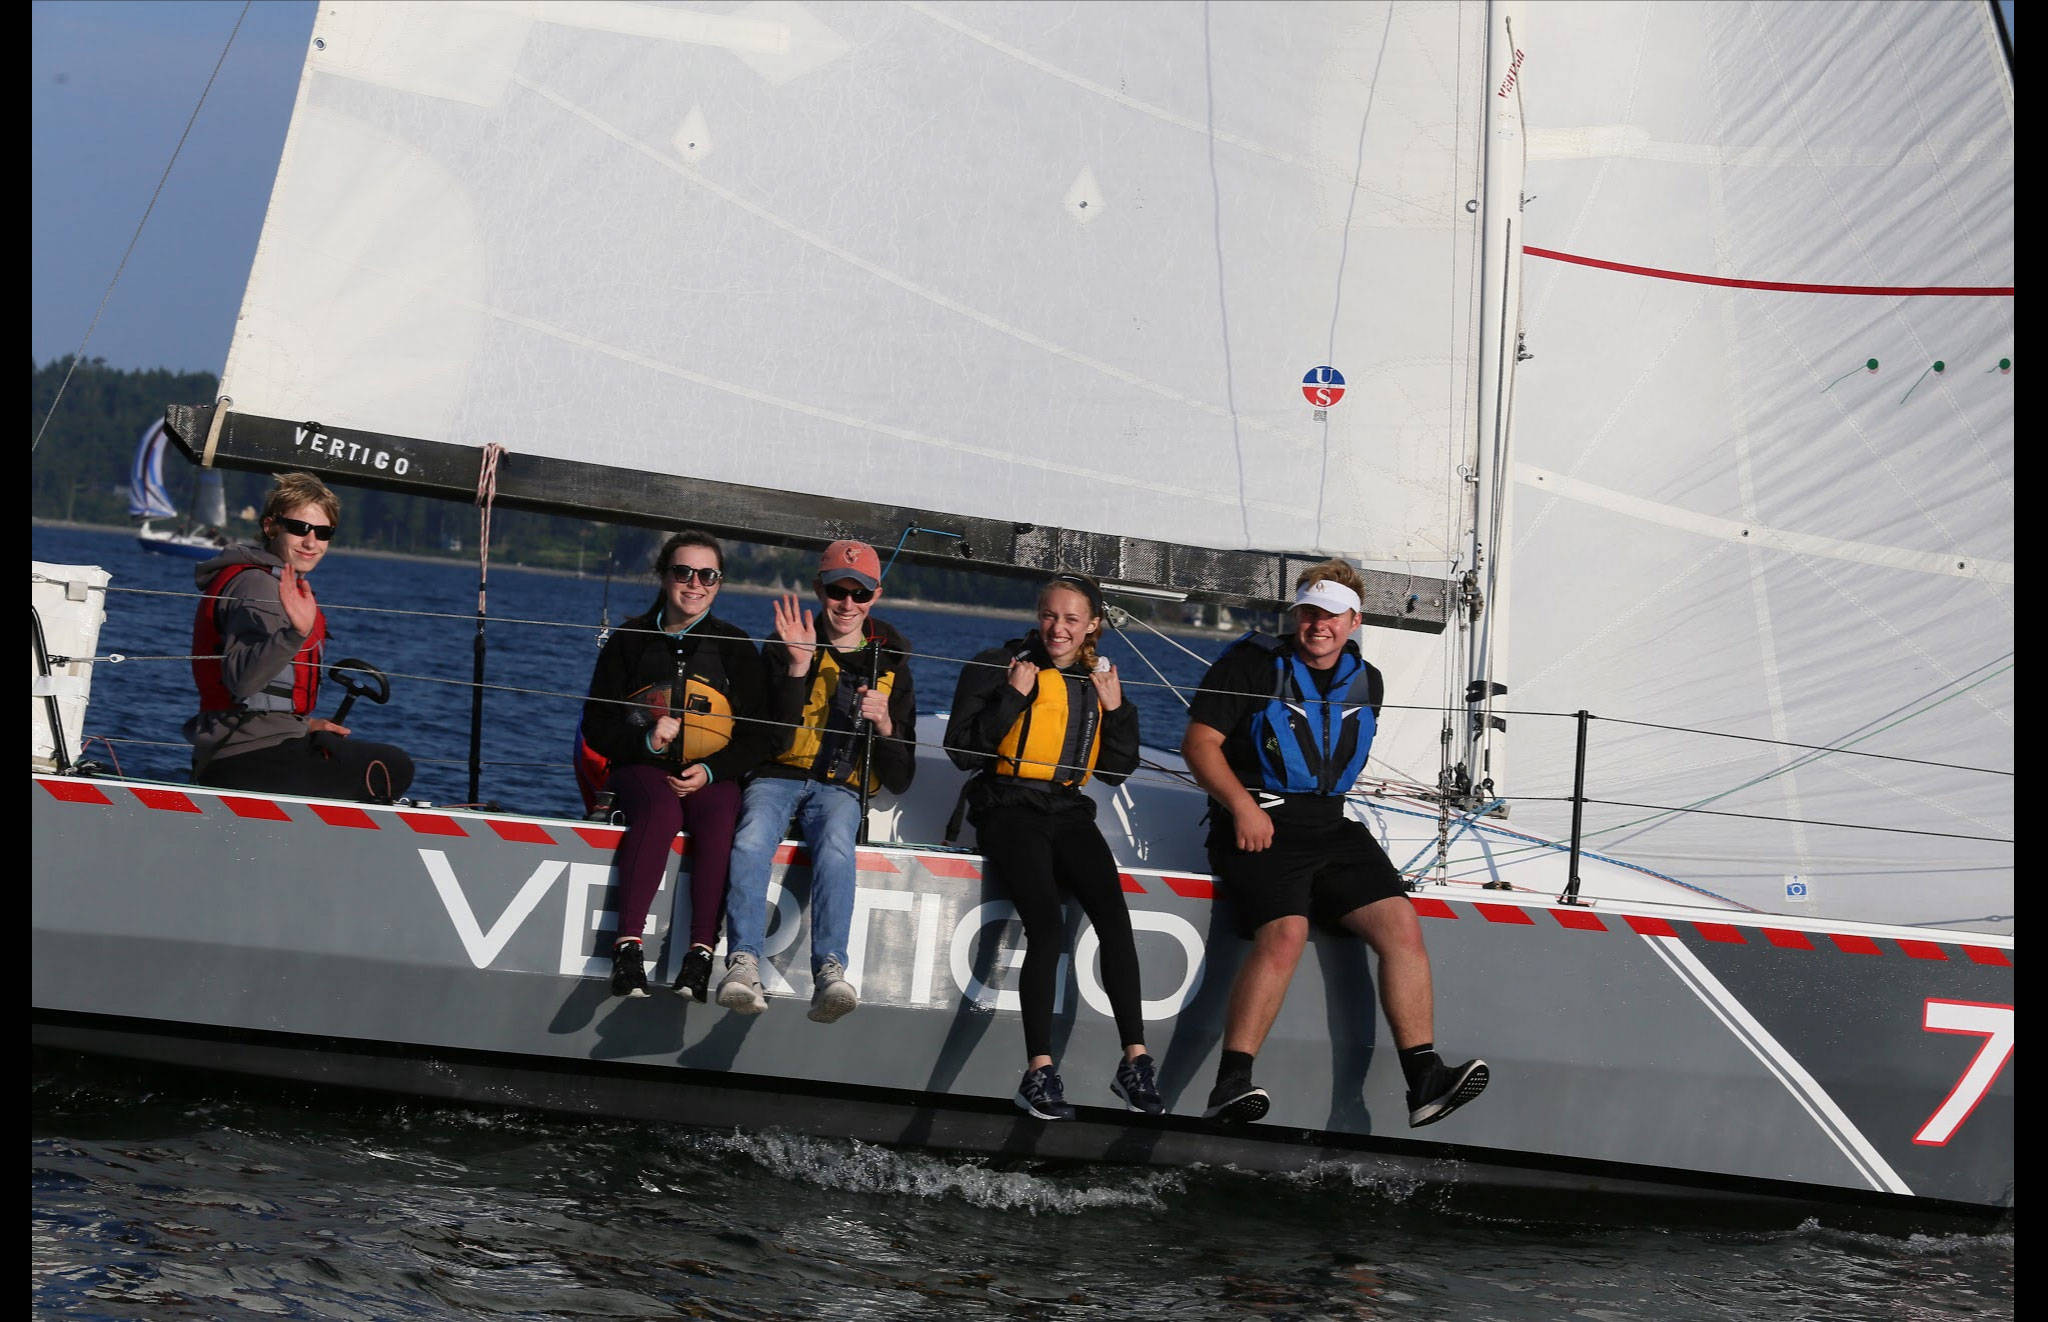 Thomas Buys, left, and his Wildcat Sailing Club teammates competed in Vertigo last week.(Photo by Victor Paru)